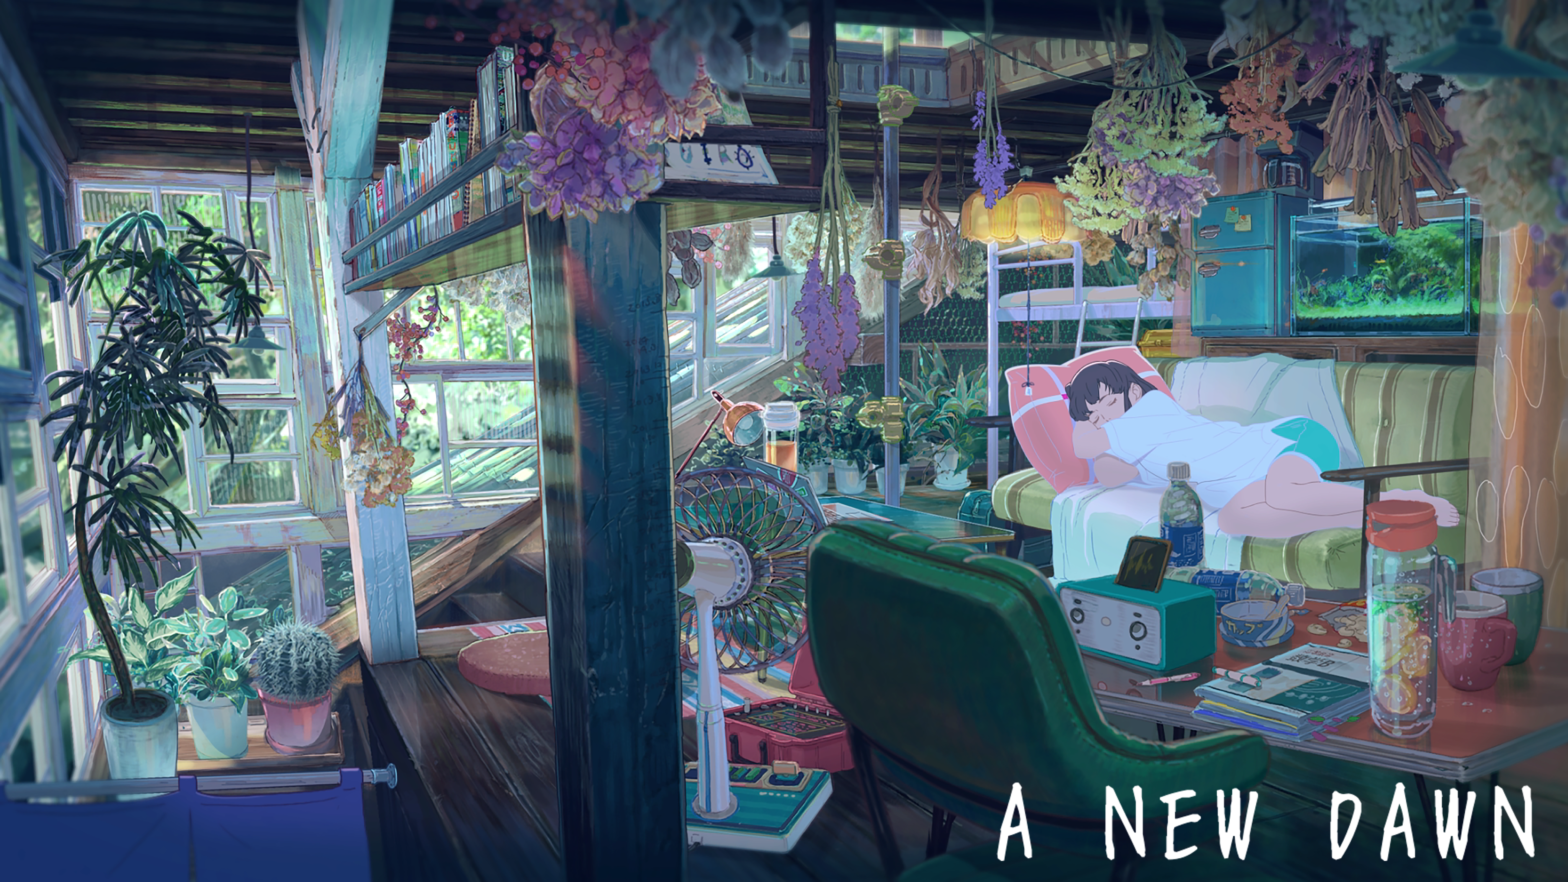 The animated film “A NEW DAWN” directed by Yoshitoshi Shinomiya and production by Studio Outrigger, was selected for the Annecy Animation Showcase at the 77th Cannes Film Festival.